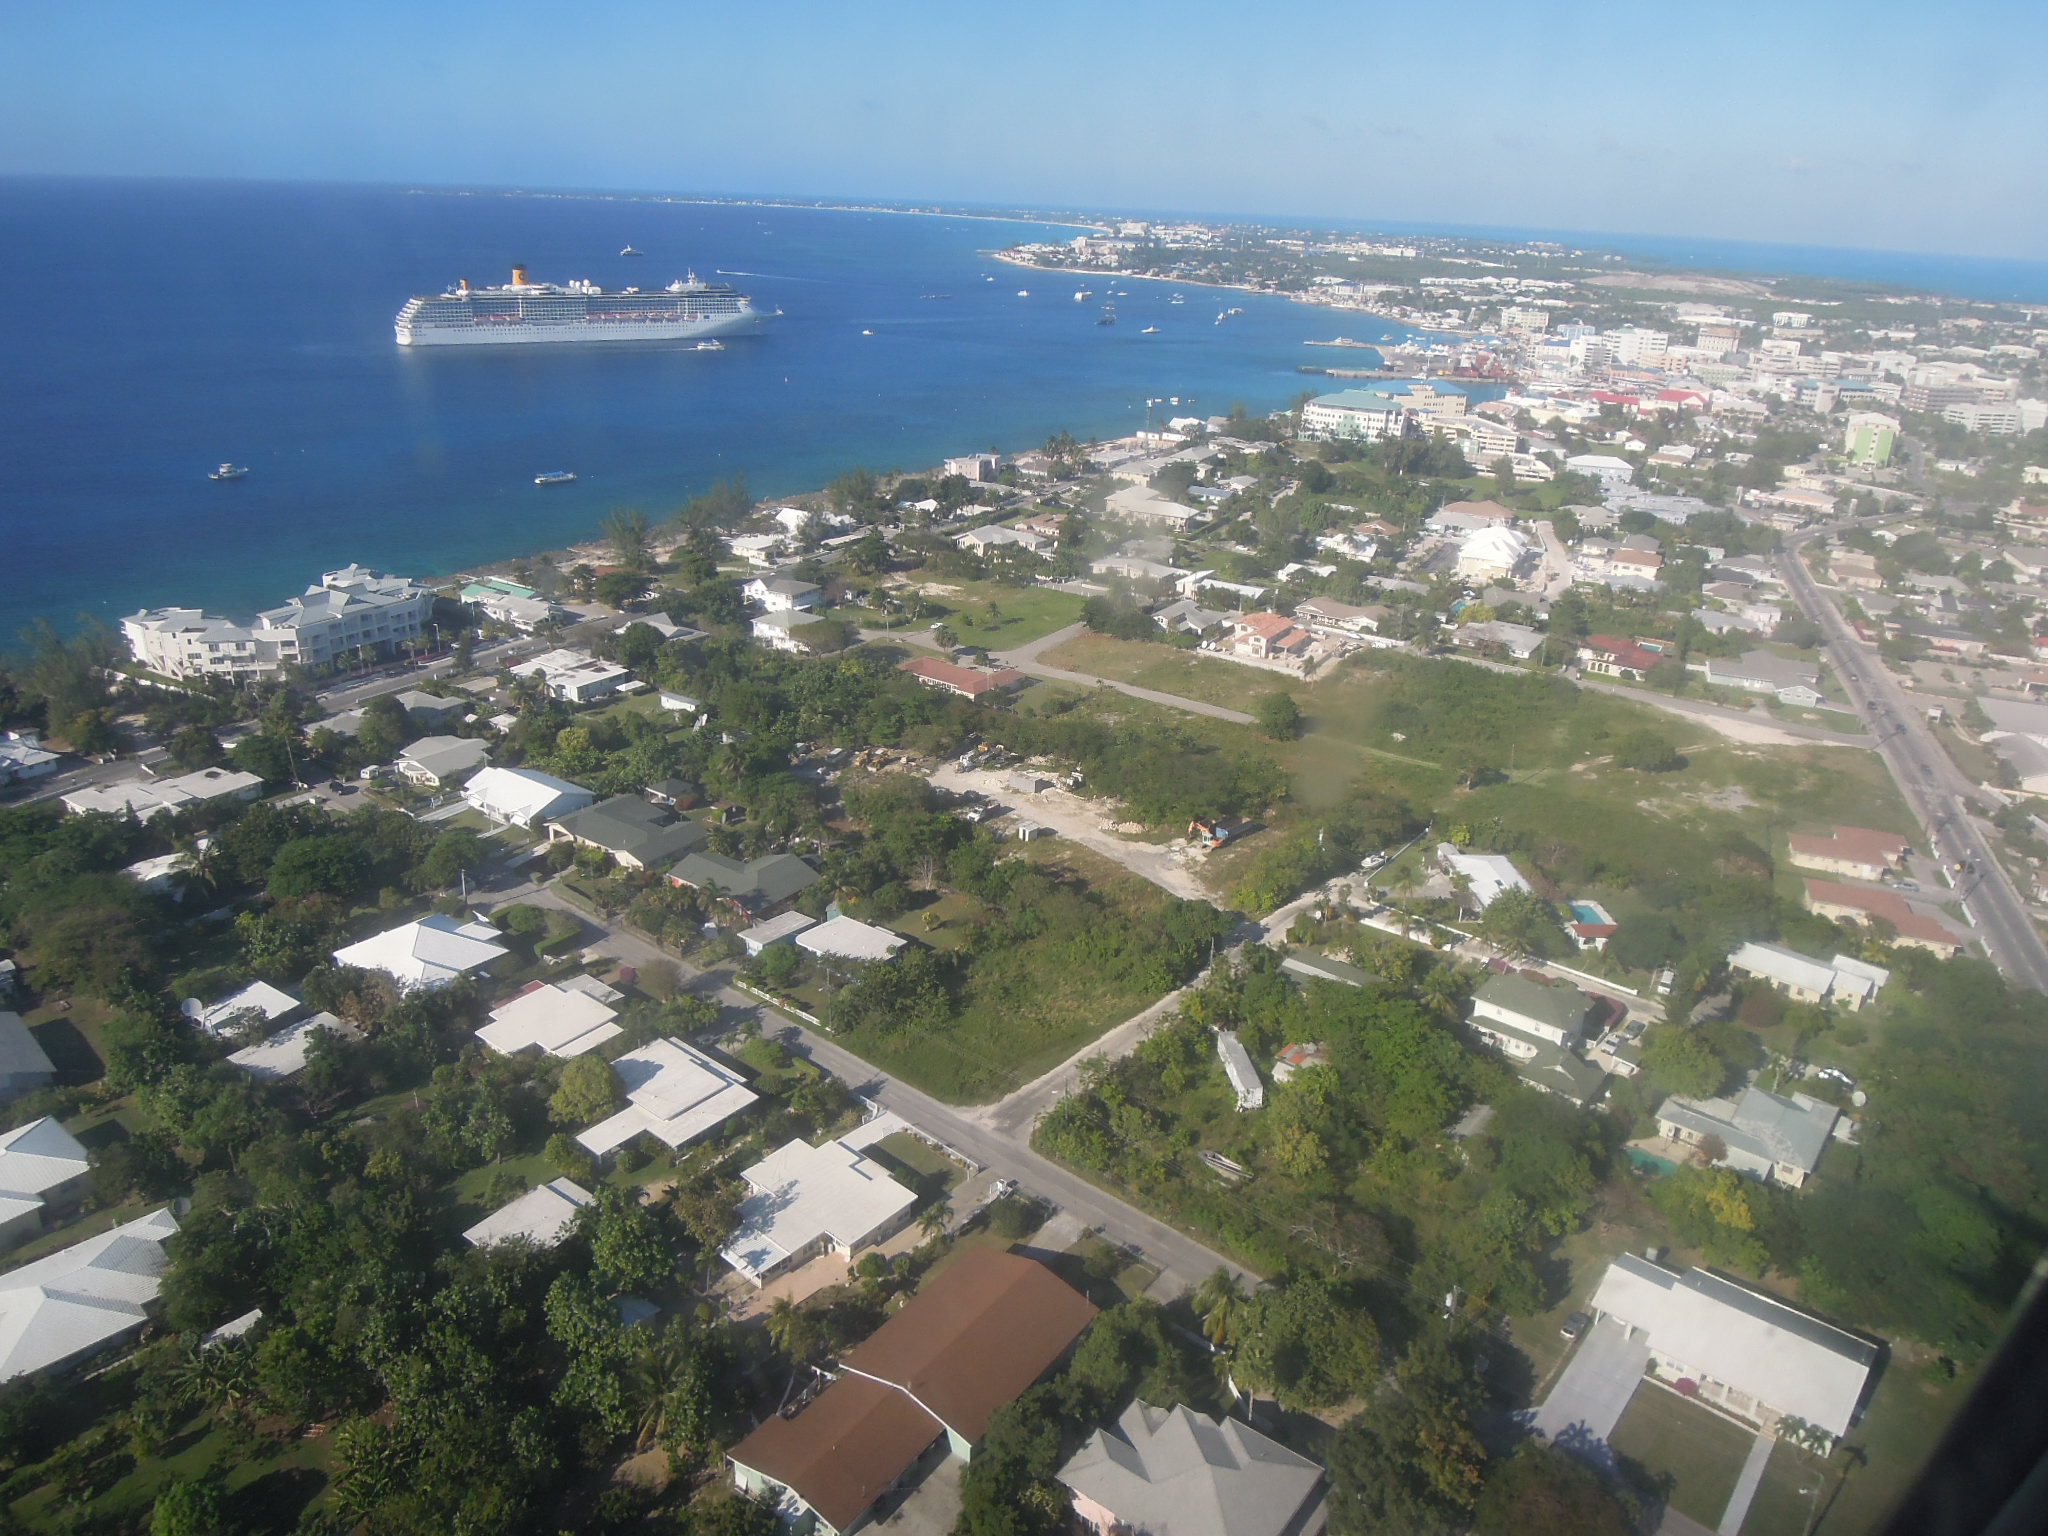 arriving - above George Town Cayman Islands